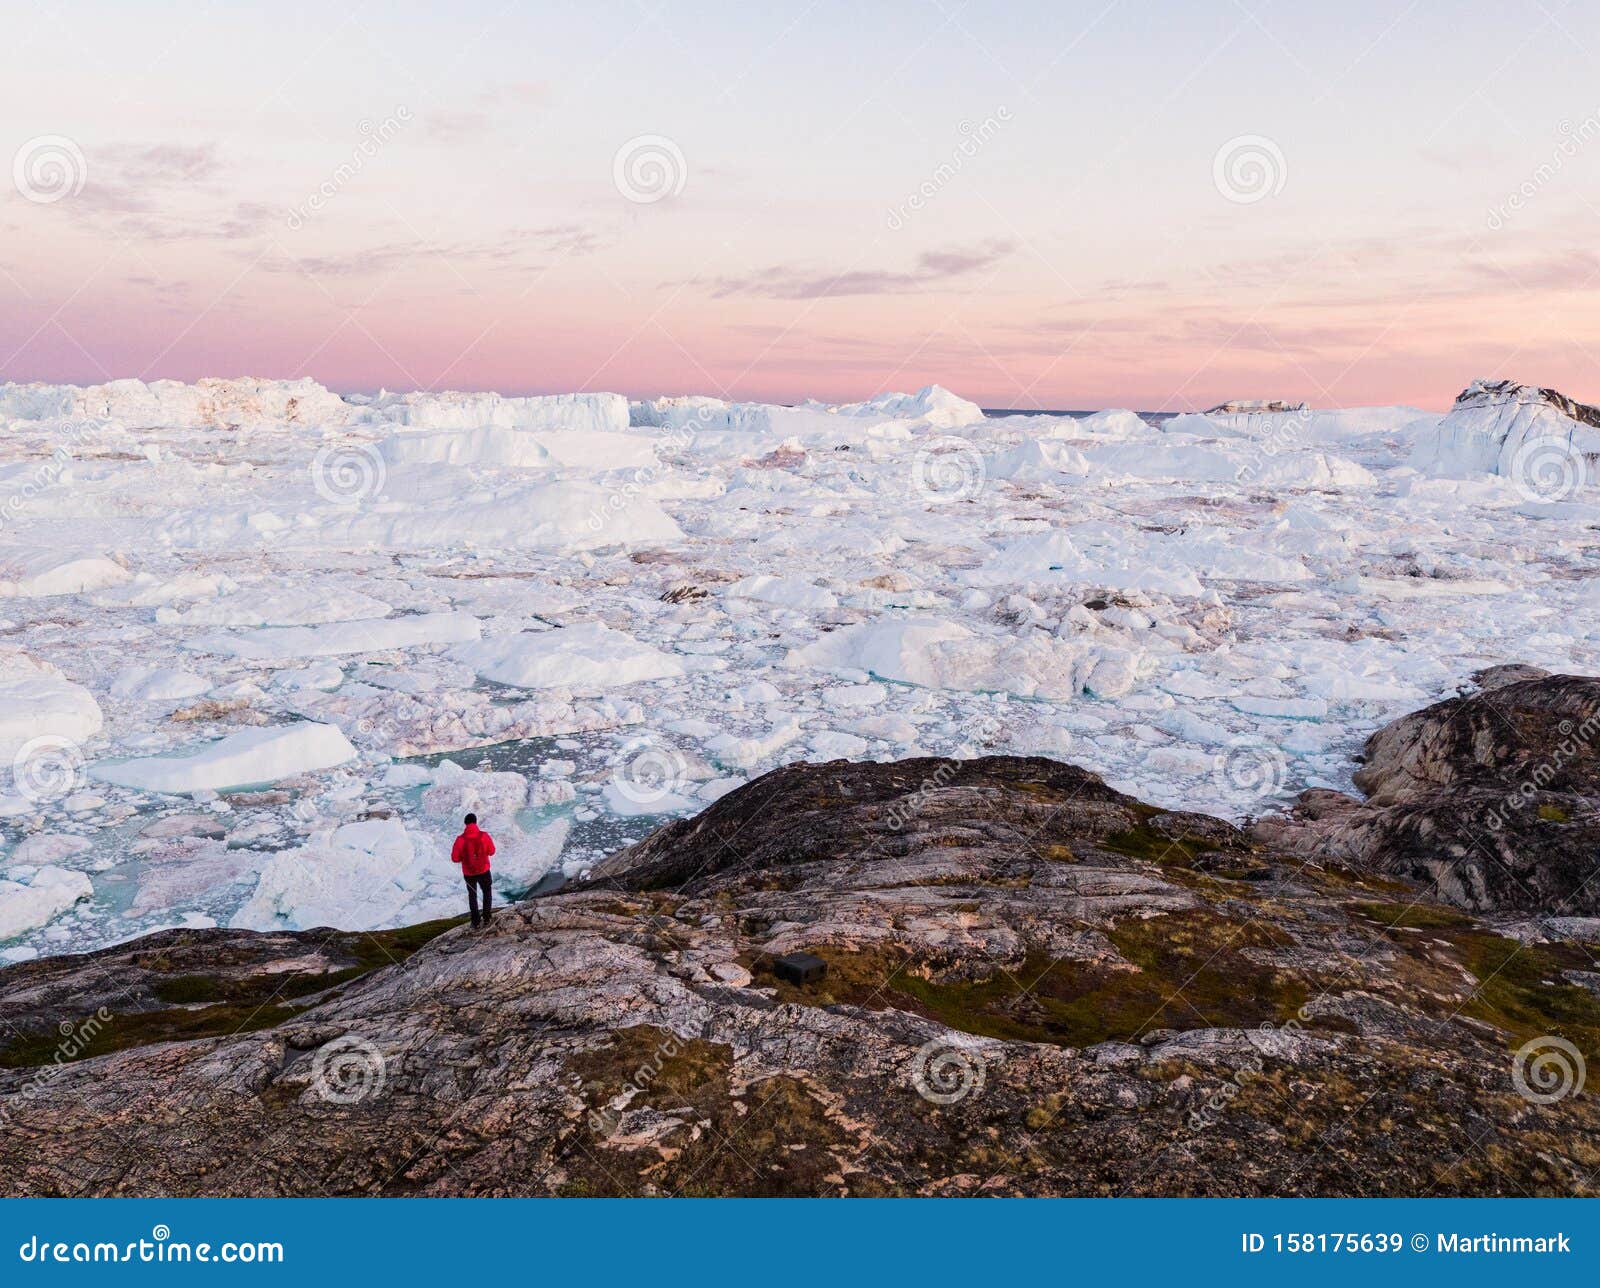 Travel in Arctic Nature with Icebergs - Greenland Tourist Man Explorer Stock Image - Image of climate, icebergs: 158175639